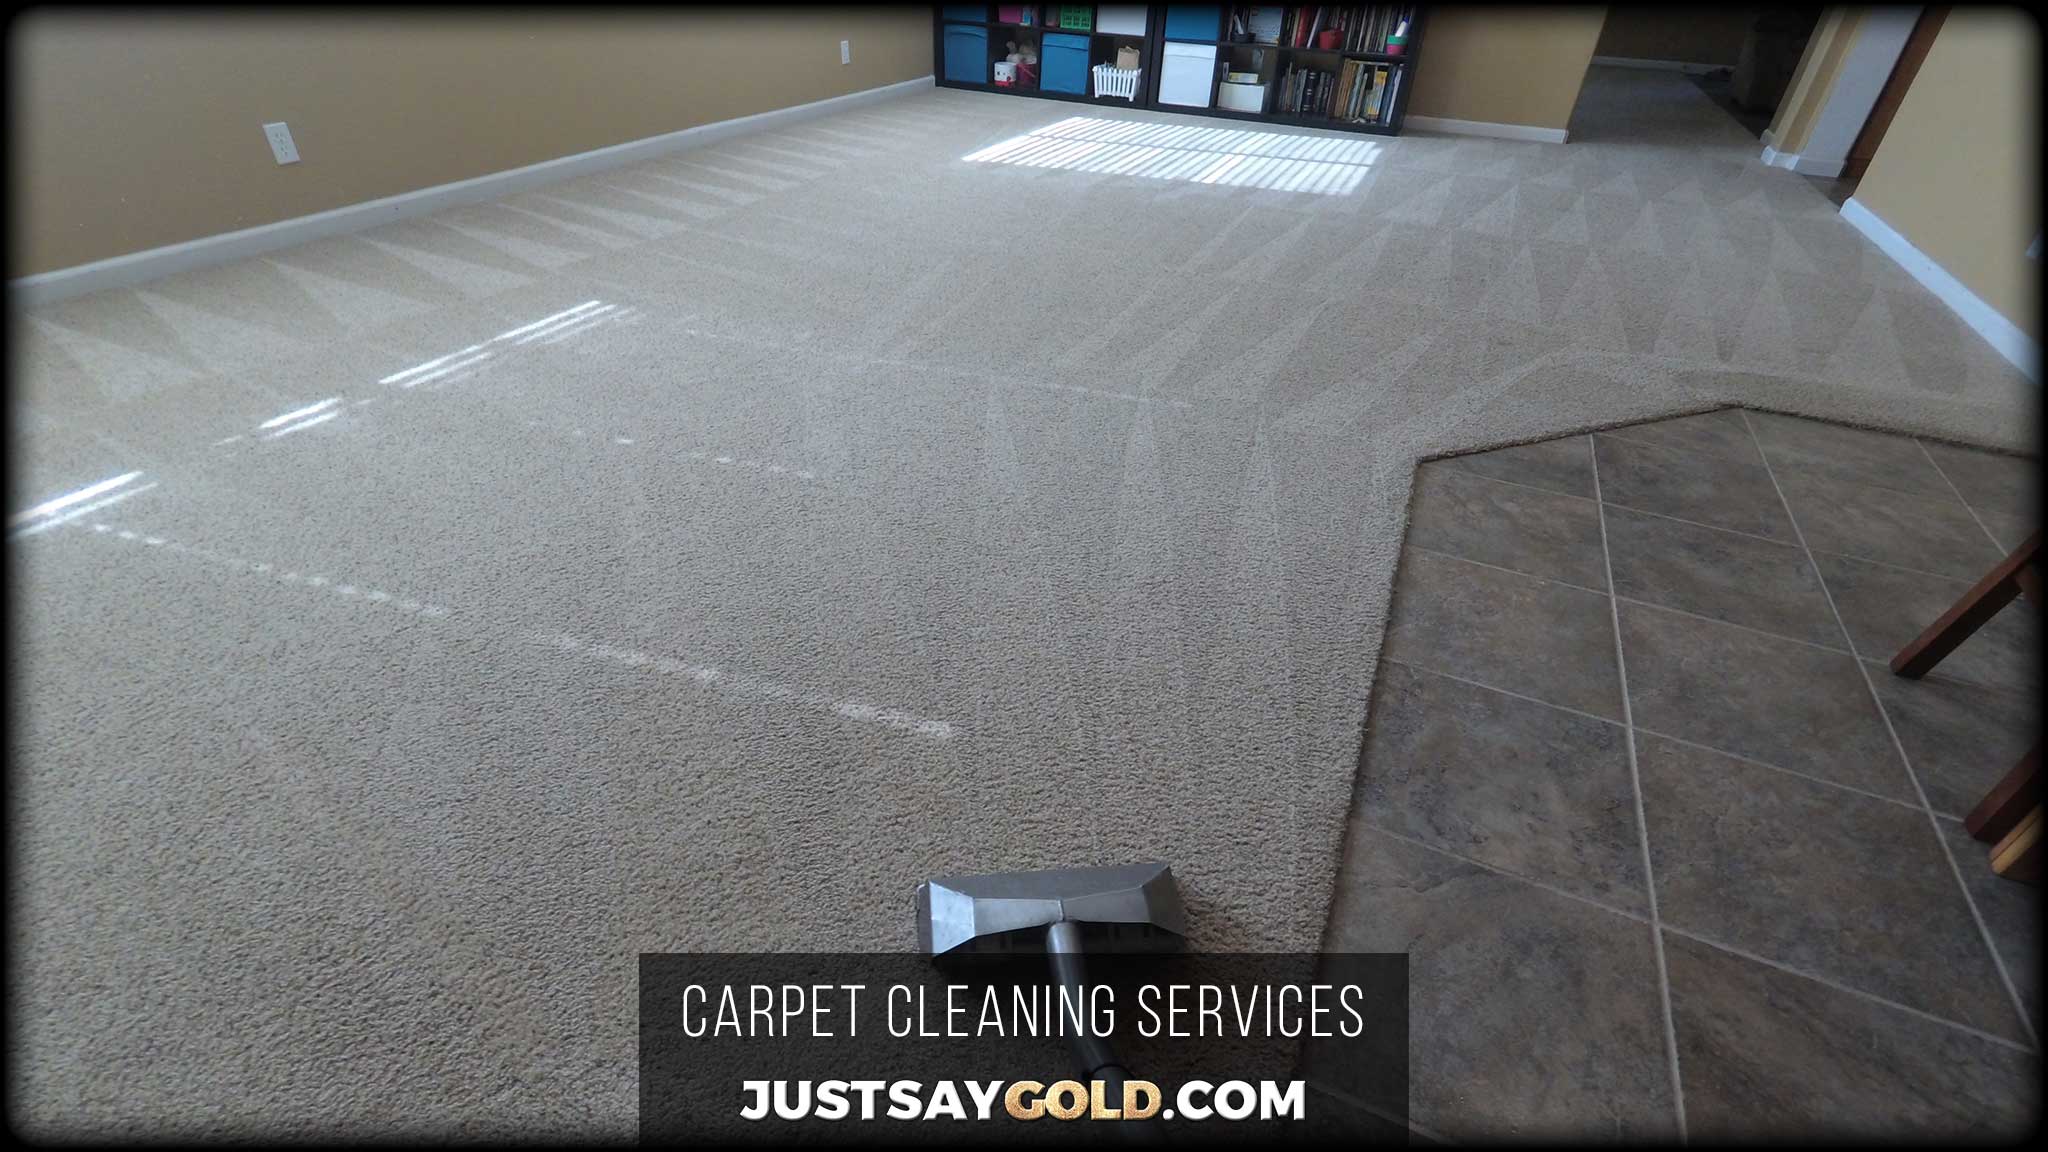 Carpet Cleaning - The Dry Guys